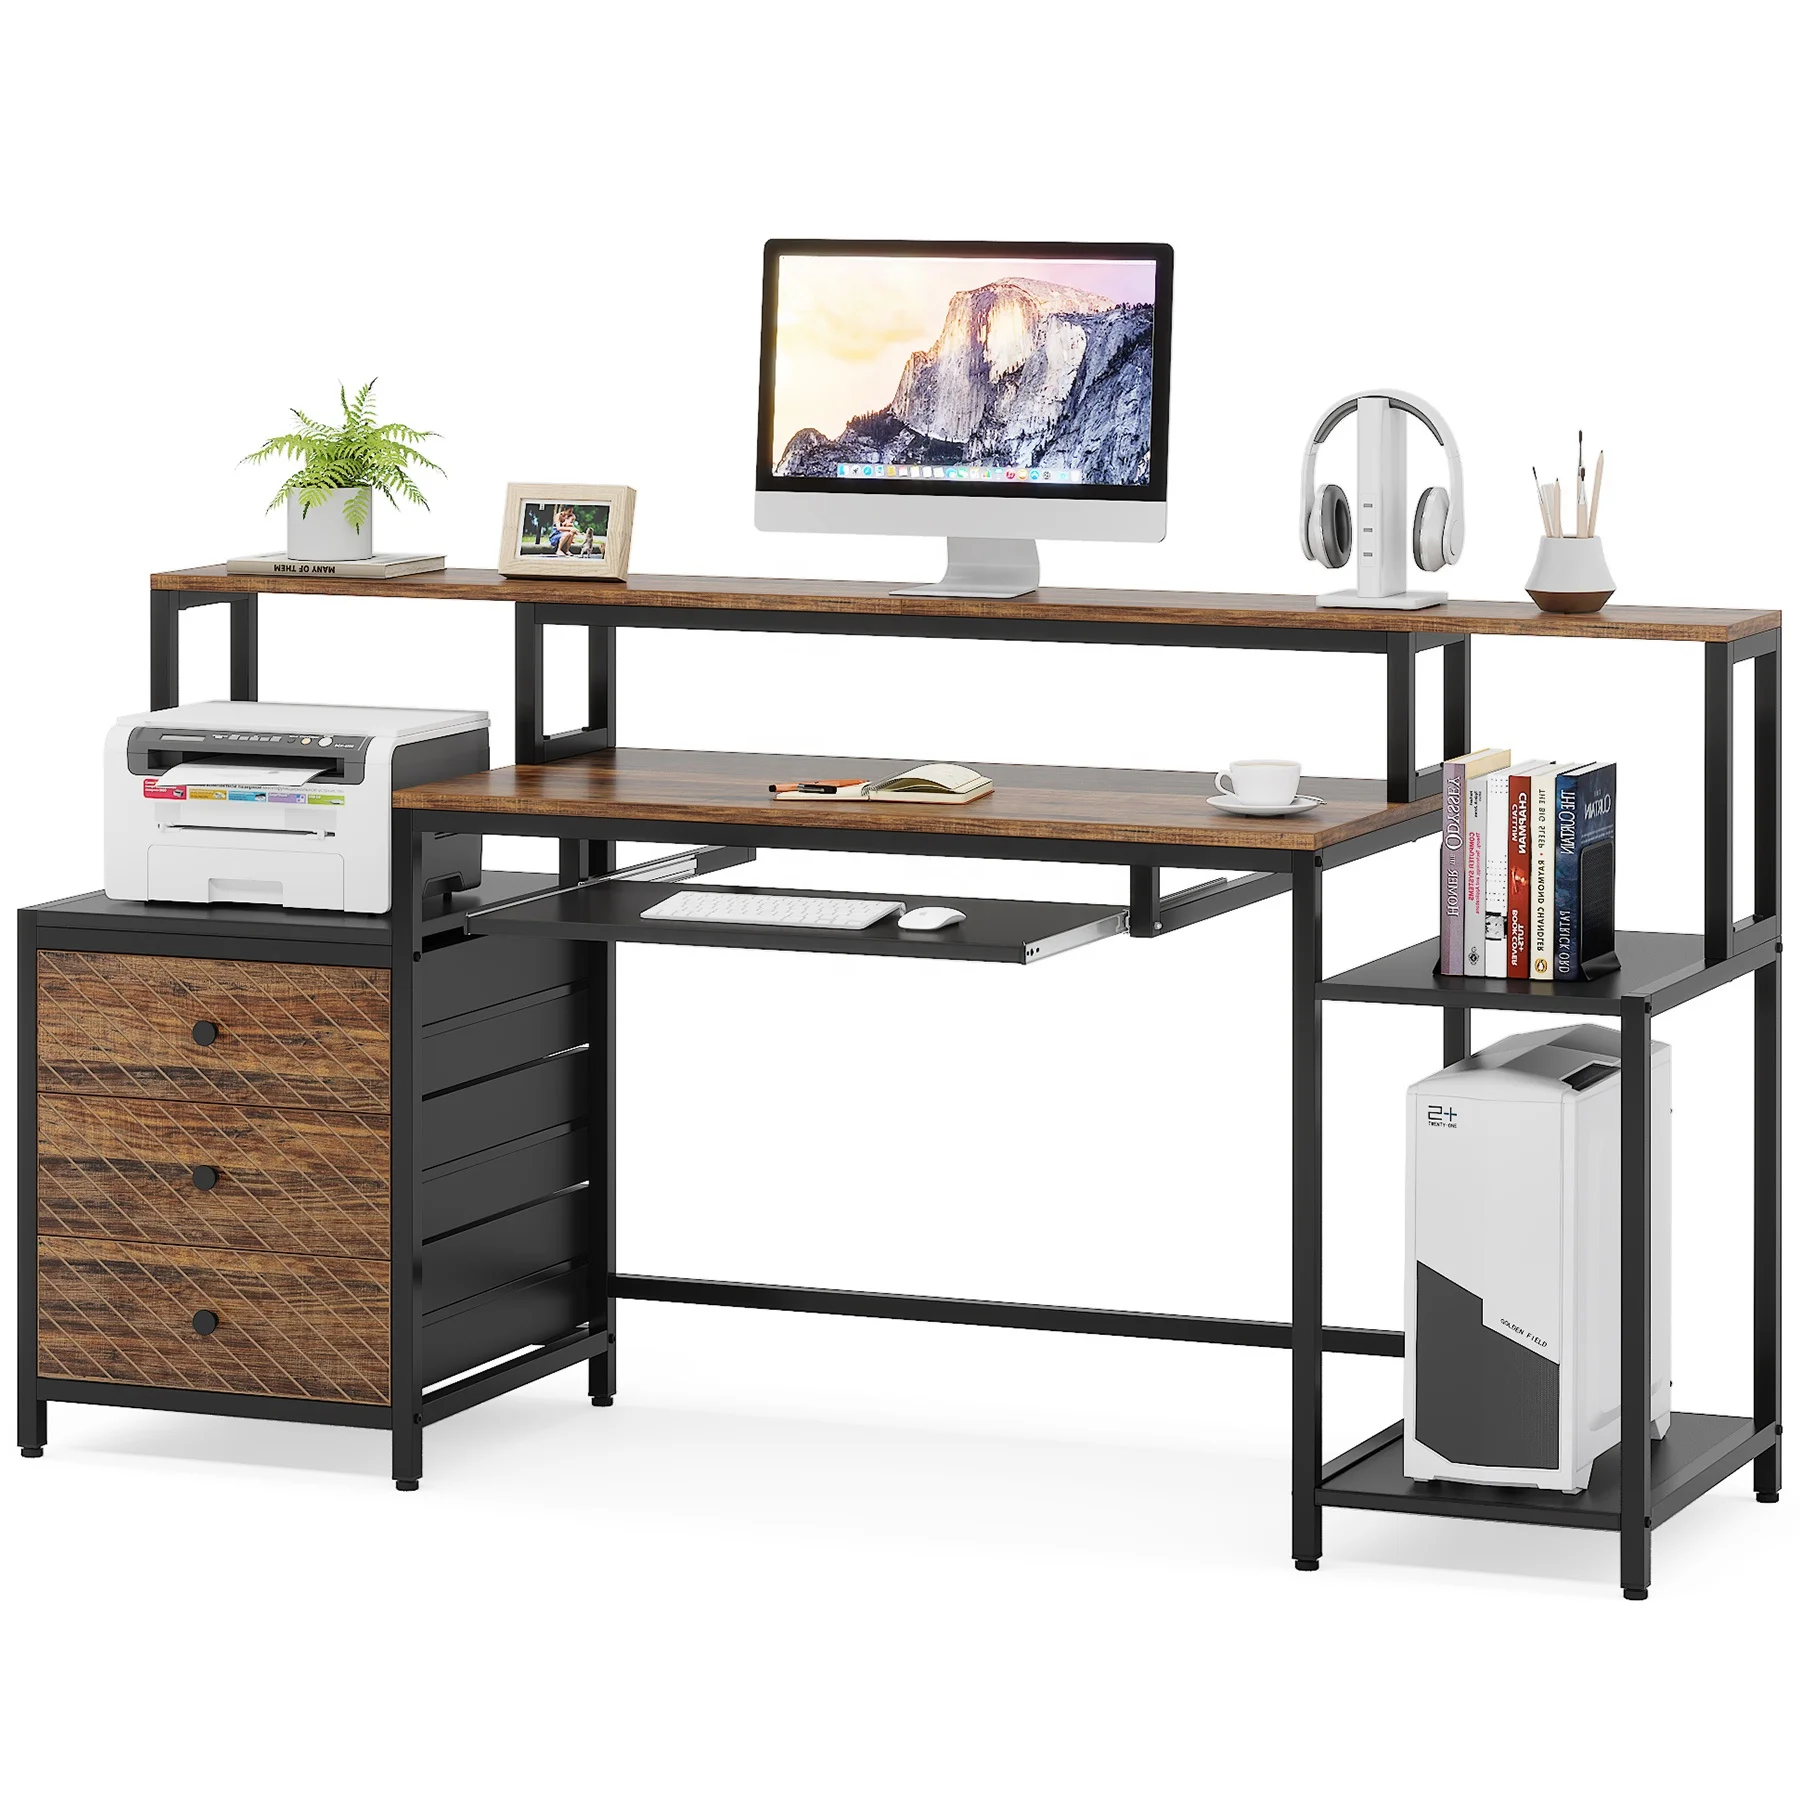 Tribesigns Industrial Reversible Long PC Gaming Desk with Keyboard Tray Study Writing Table Workstation Computer Office Desk